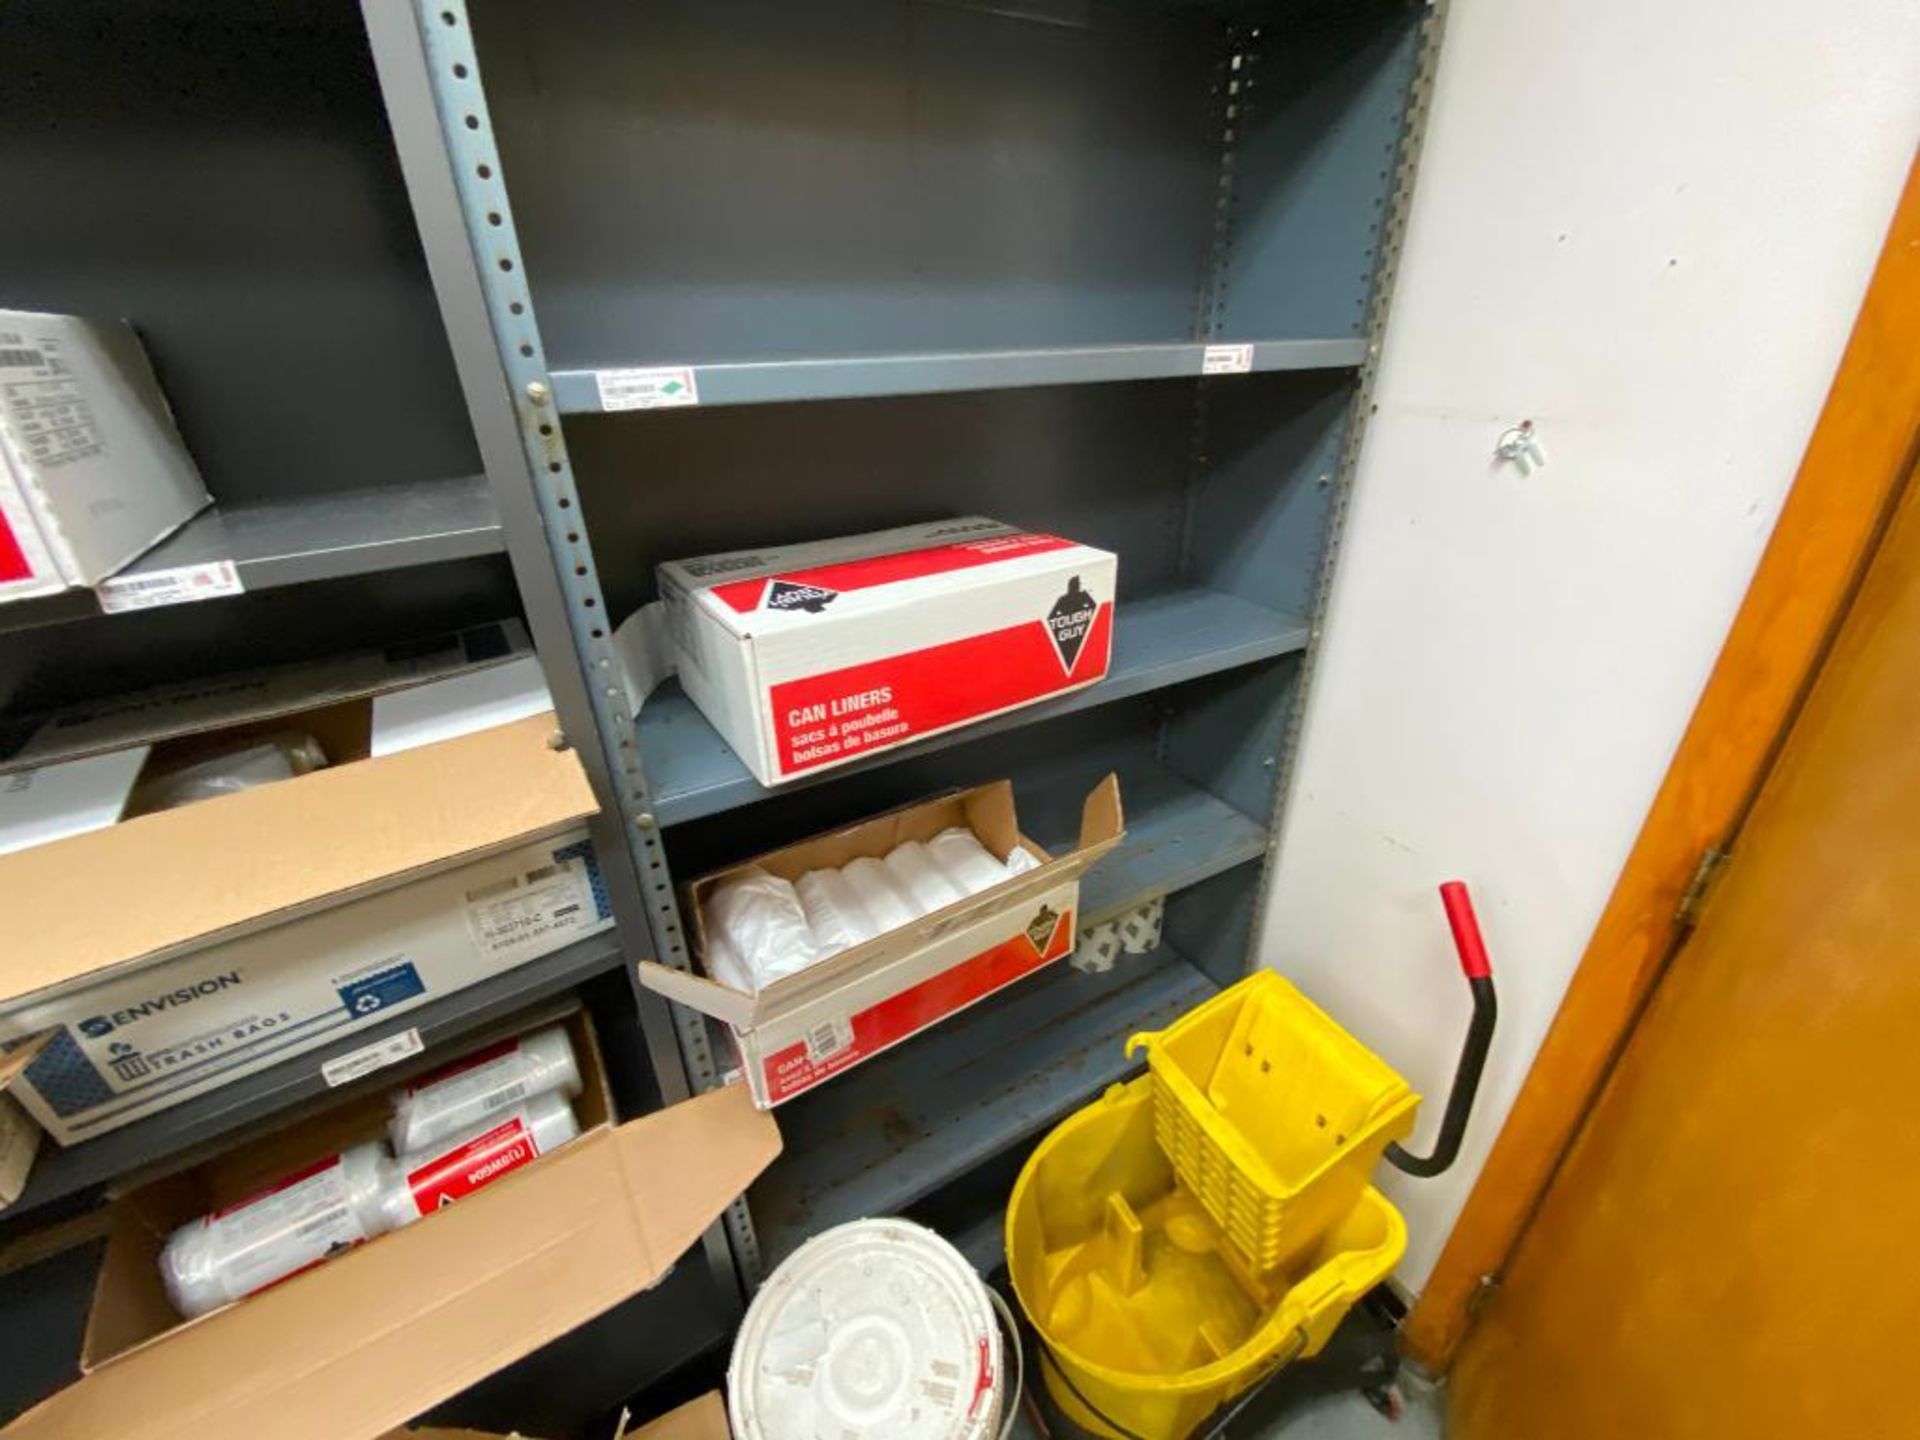 contents of supply room, JustRite flammable storage cabinets, SPX pump, assorted bits, Cryospray, in - Image 17 of 31